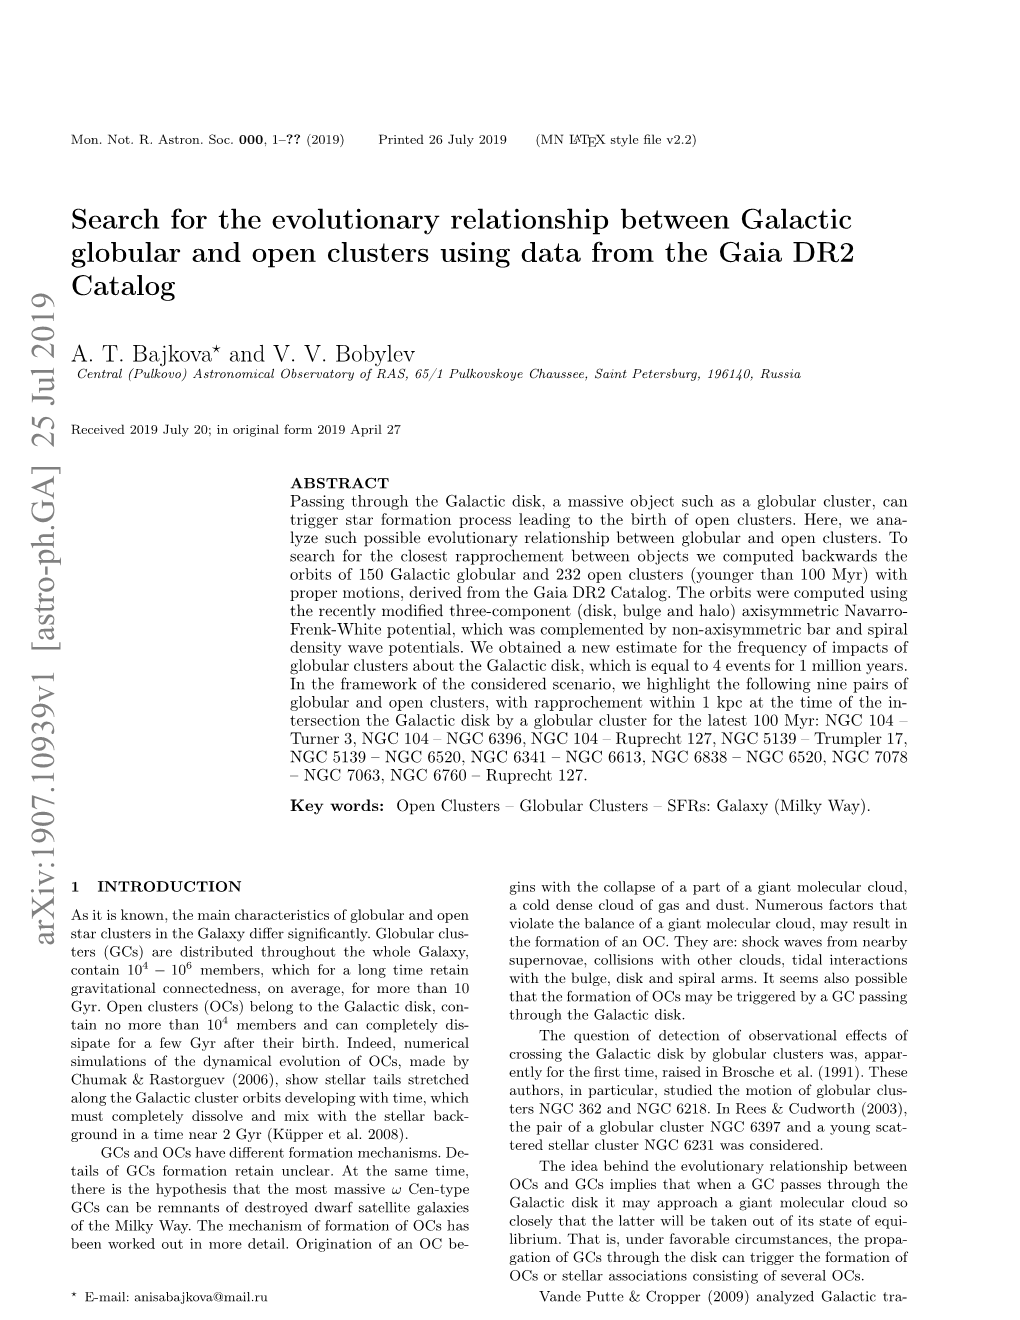 Search for the Evolutionary Relationship Between Galactic